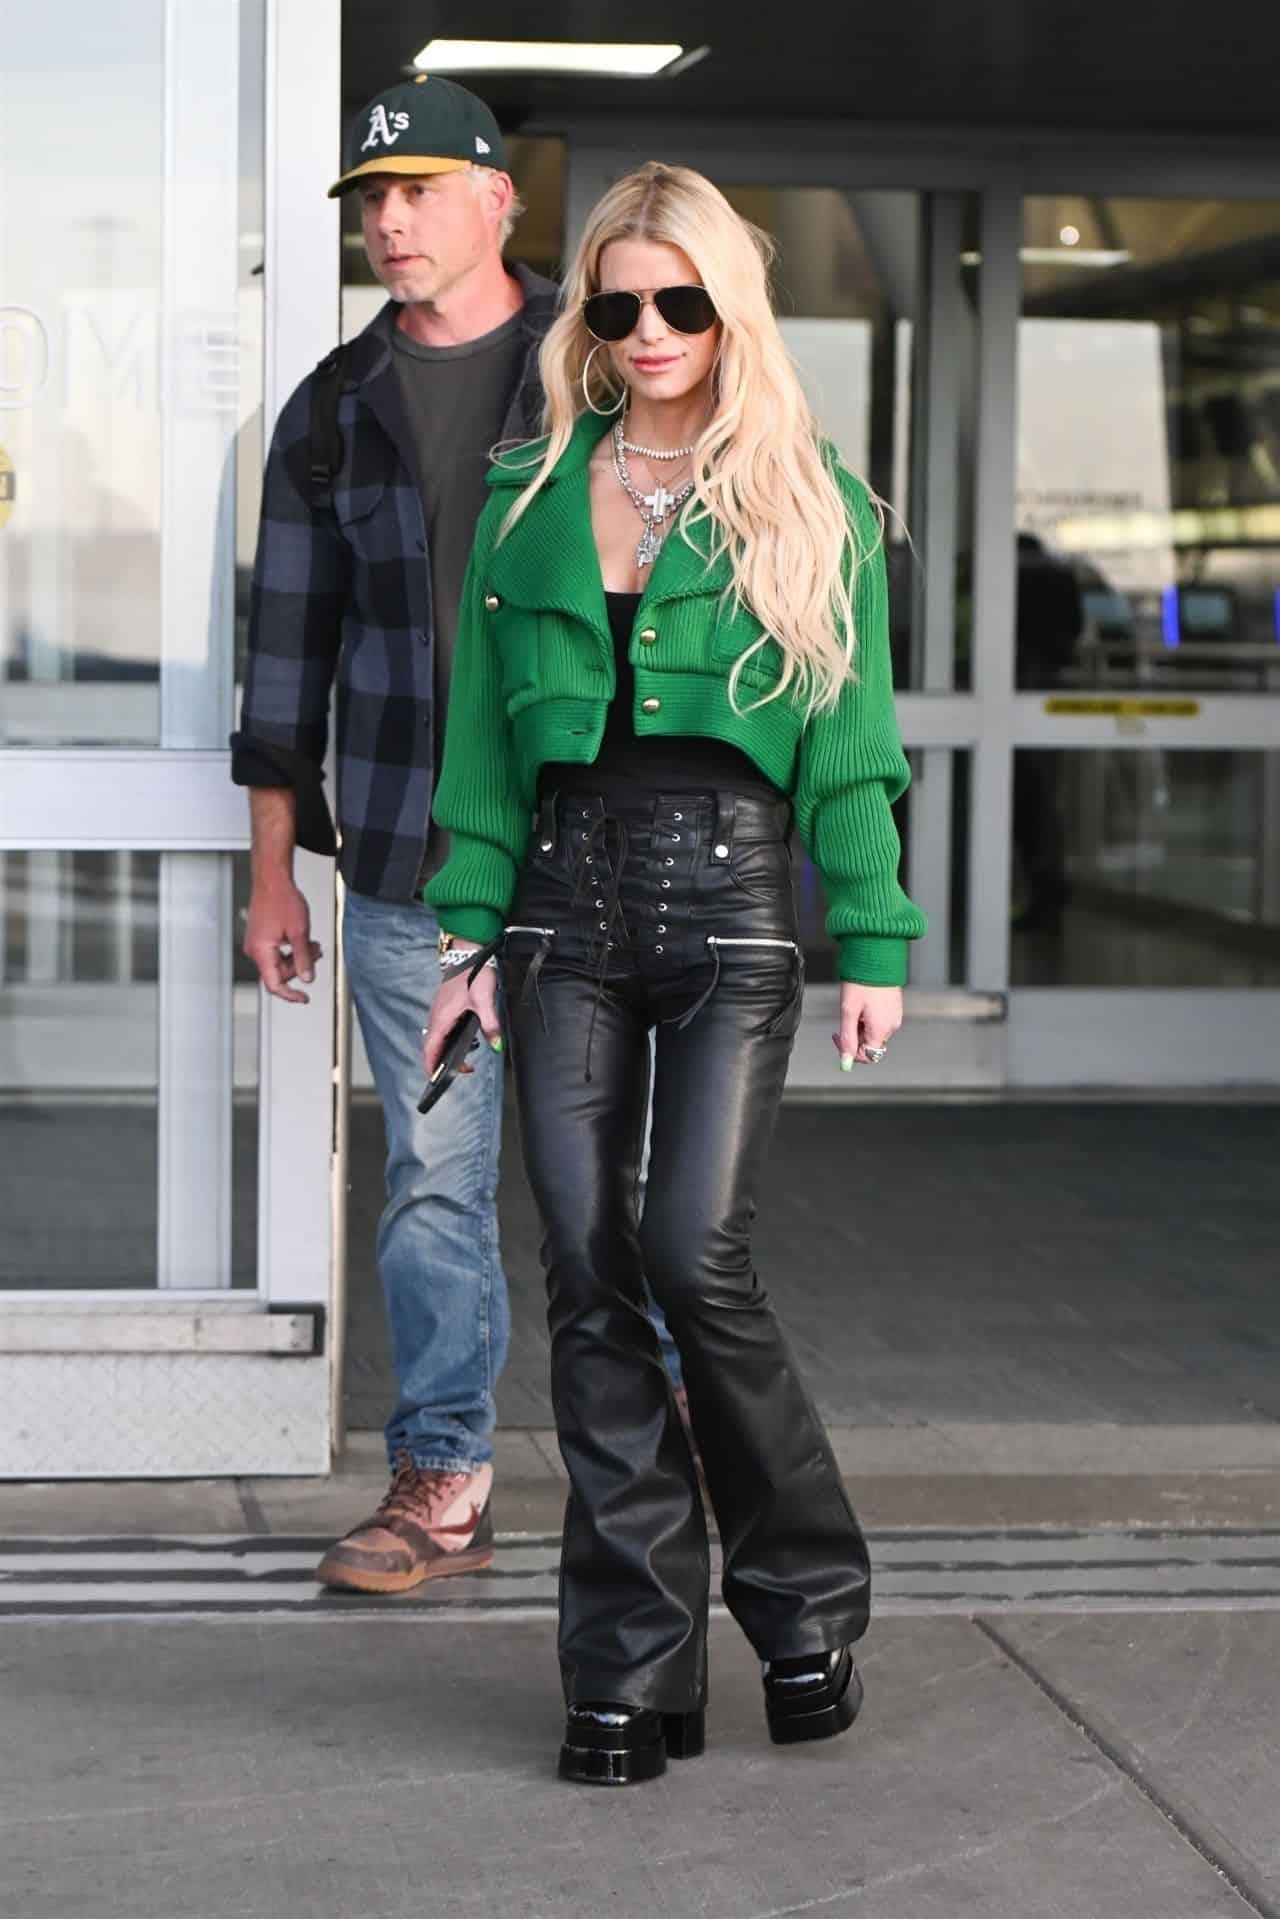 Jessica Simpson Shows Off Svelte Frame in Stylish Ensemble at JFK Airport